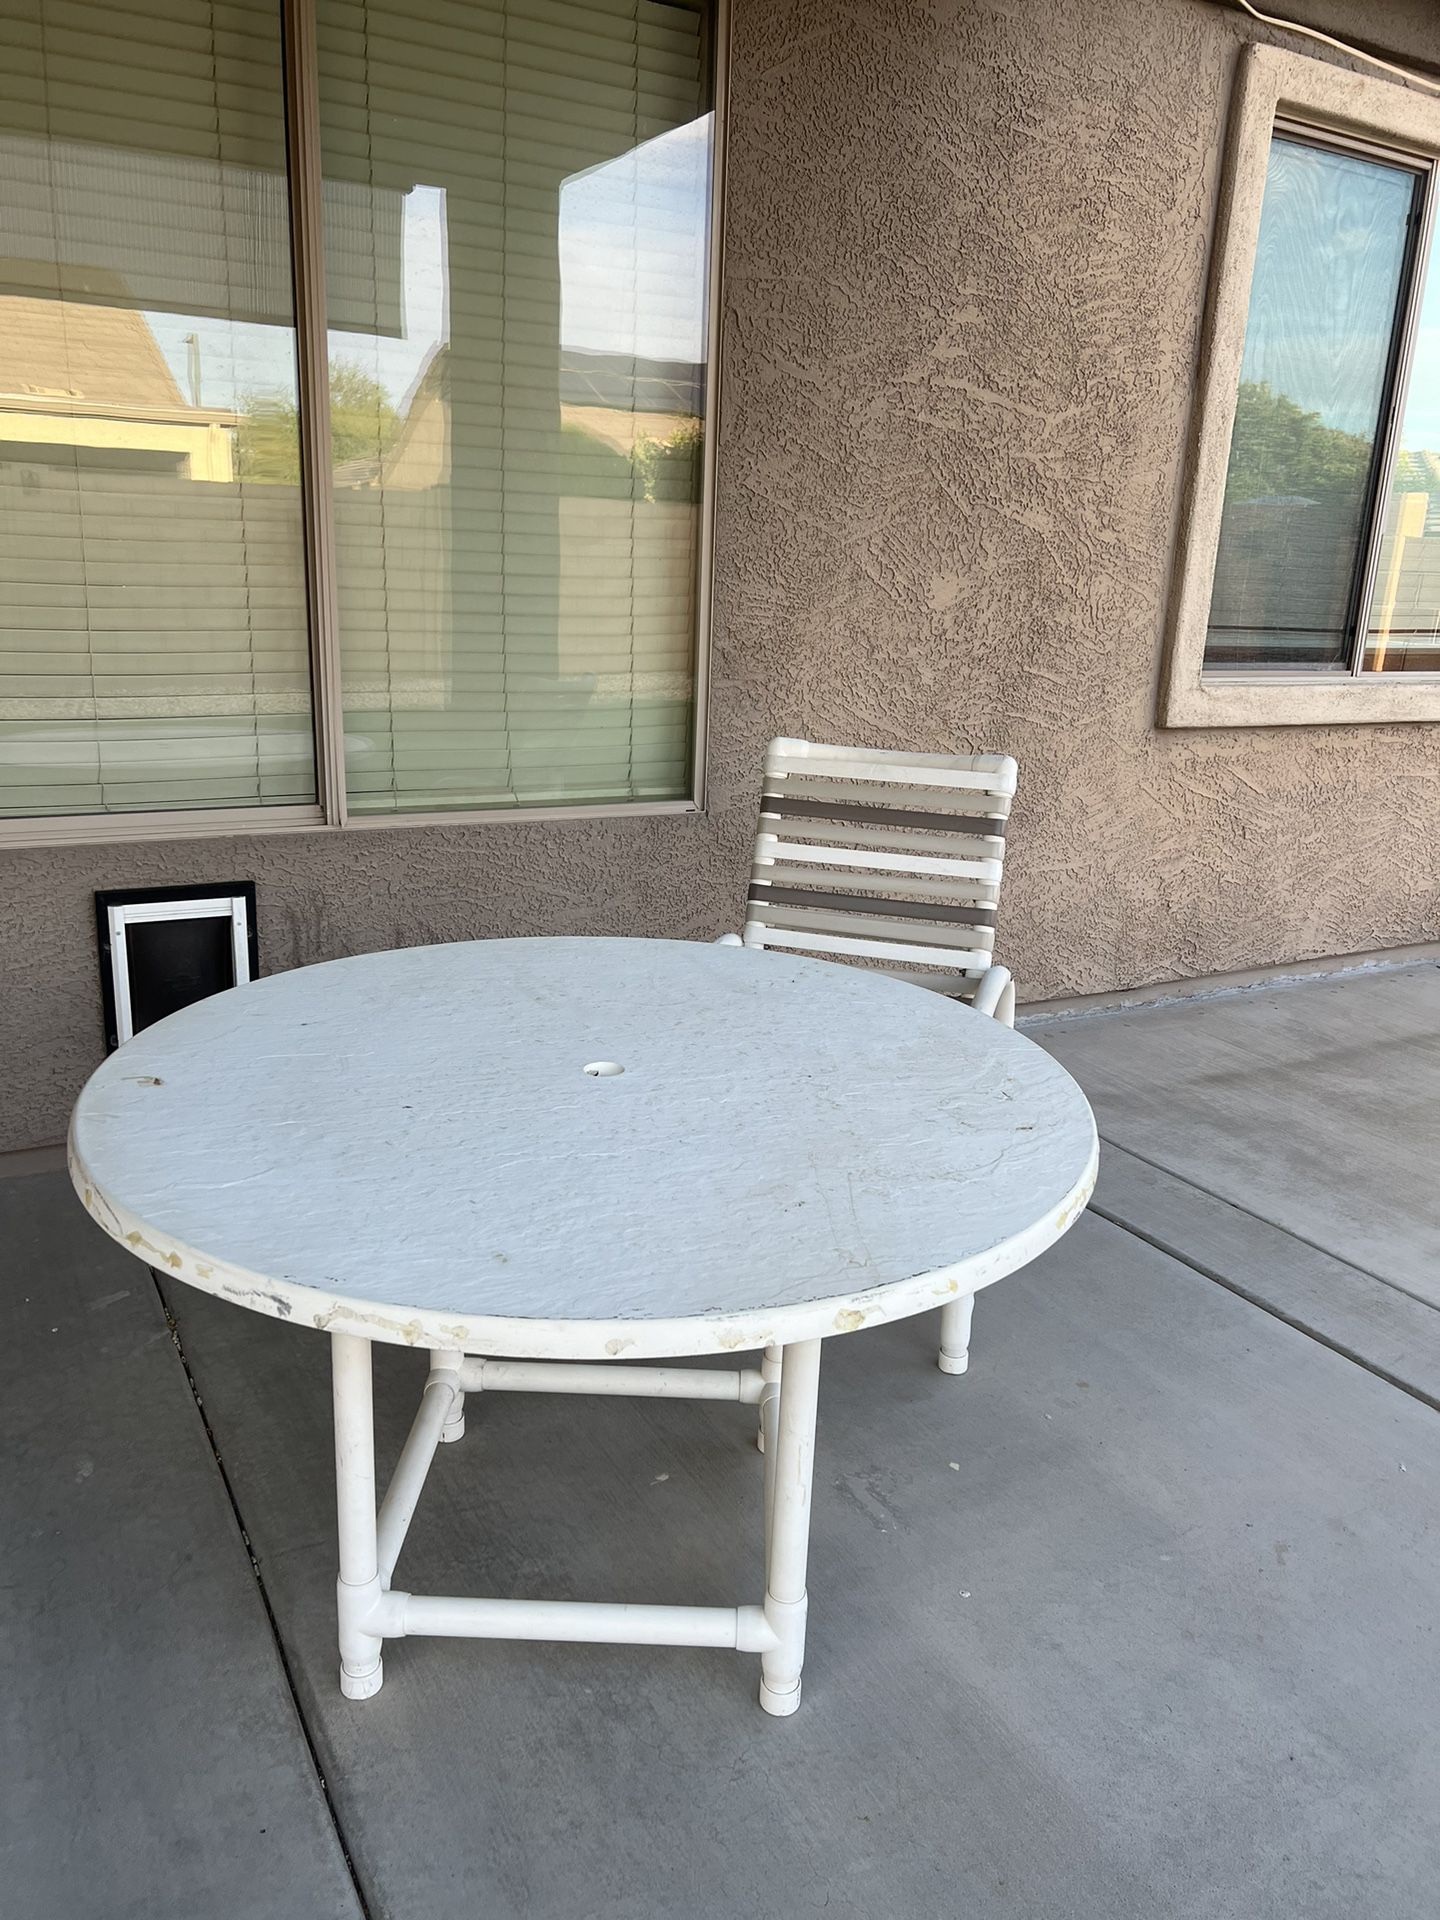 Outdoor Table And 1 Chair